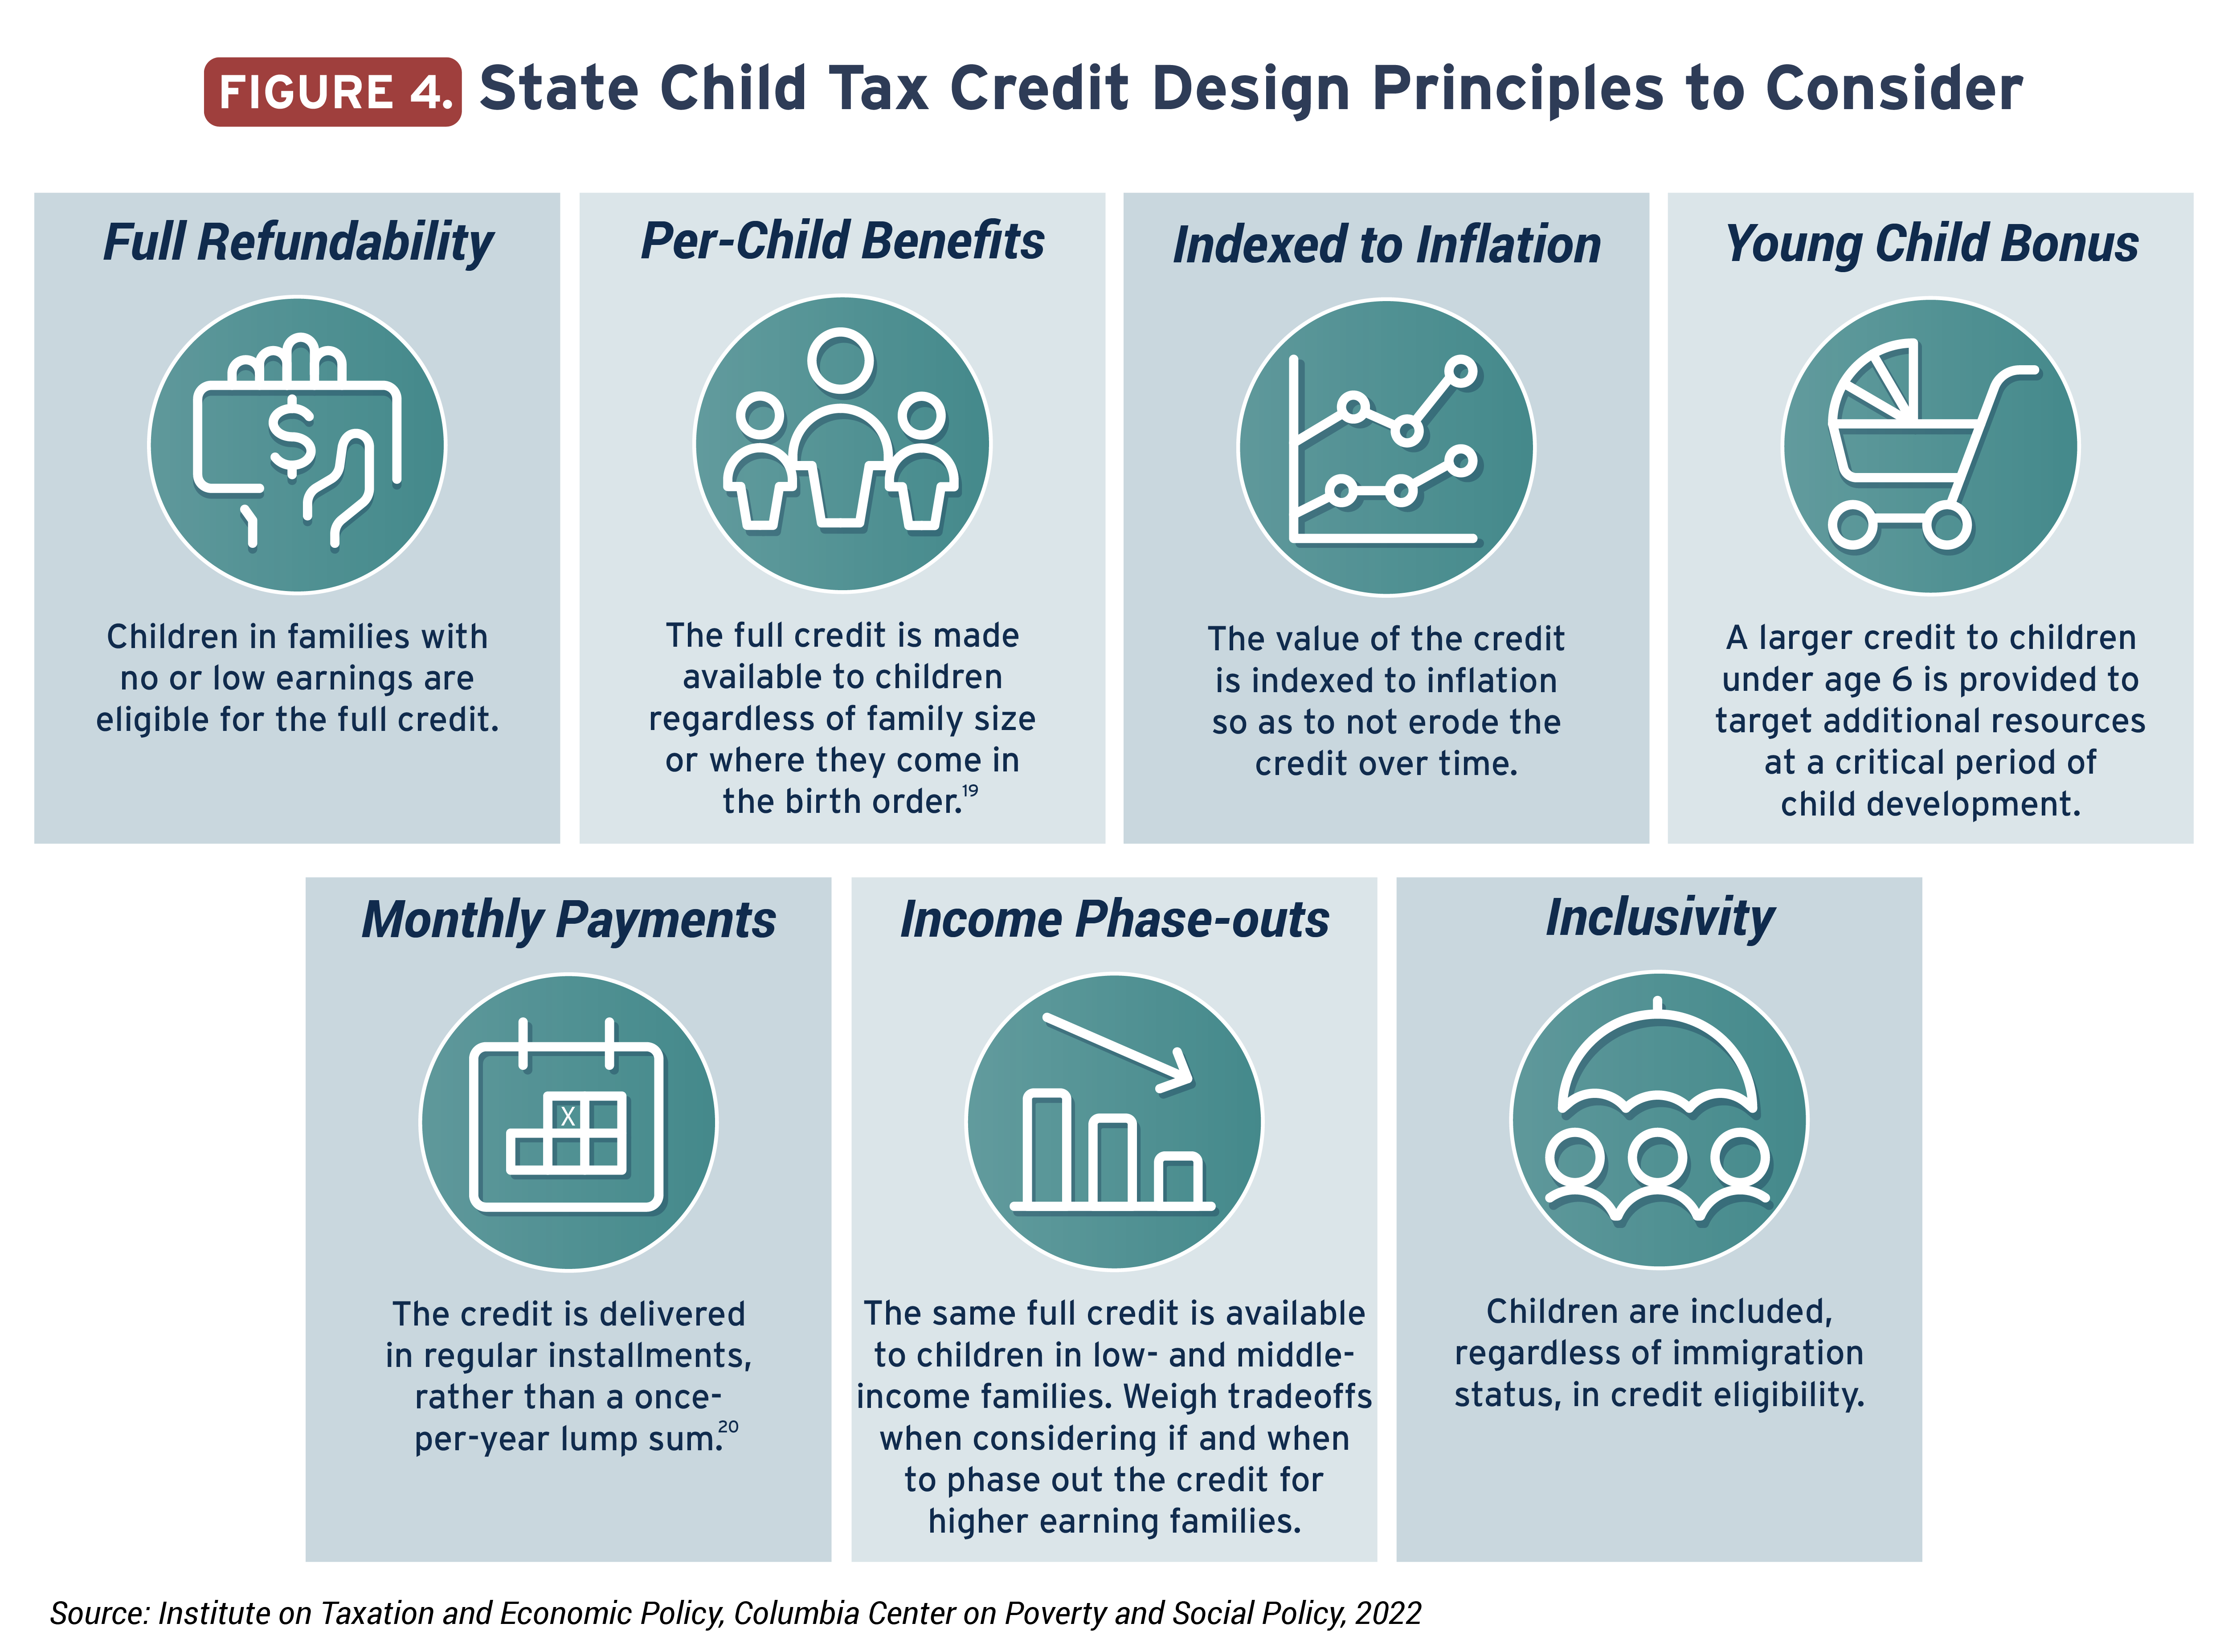 State Child Tax Credits and Child Poverty A 50State Analysis ITEP